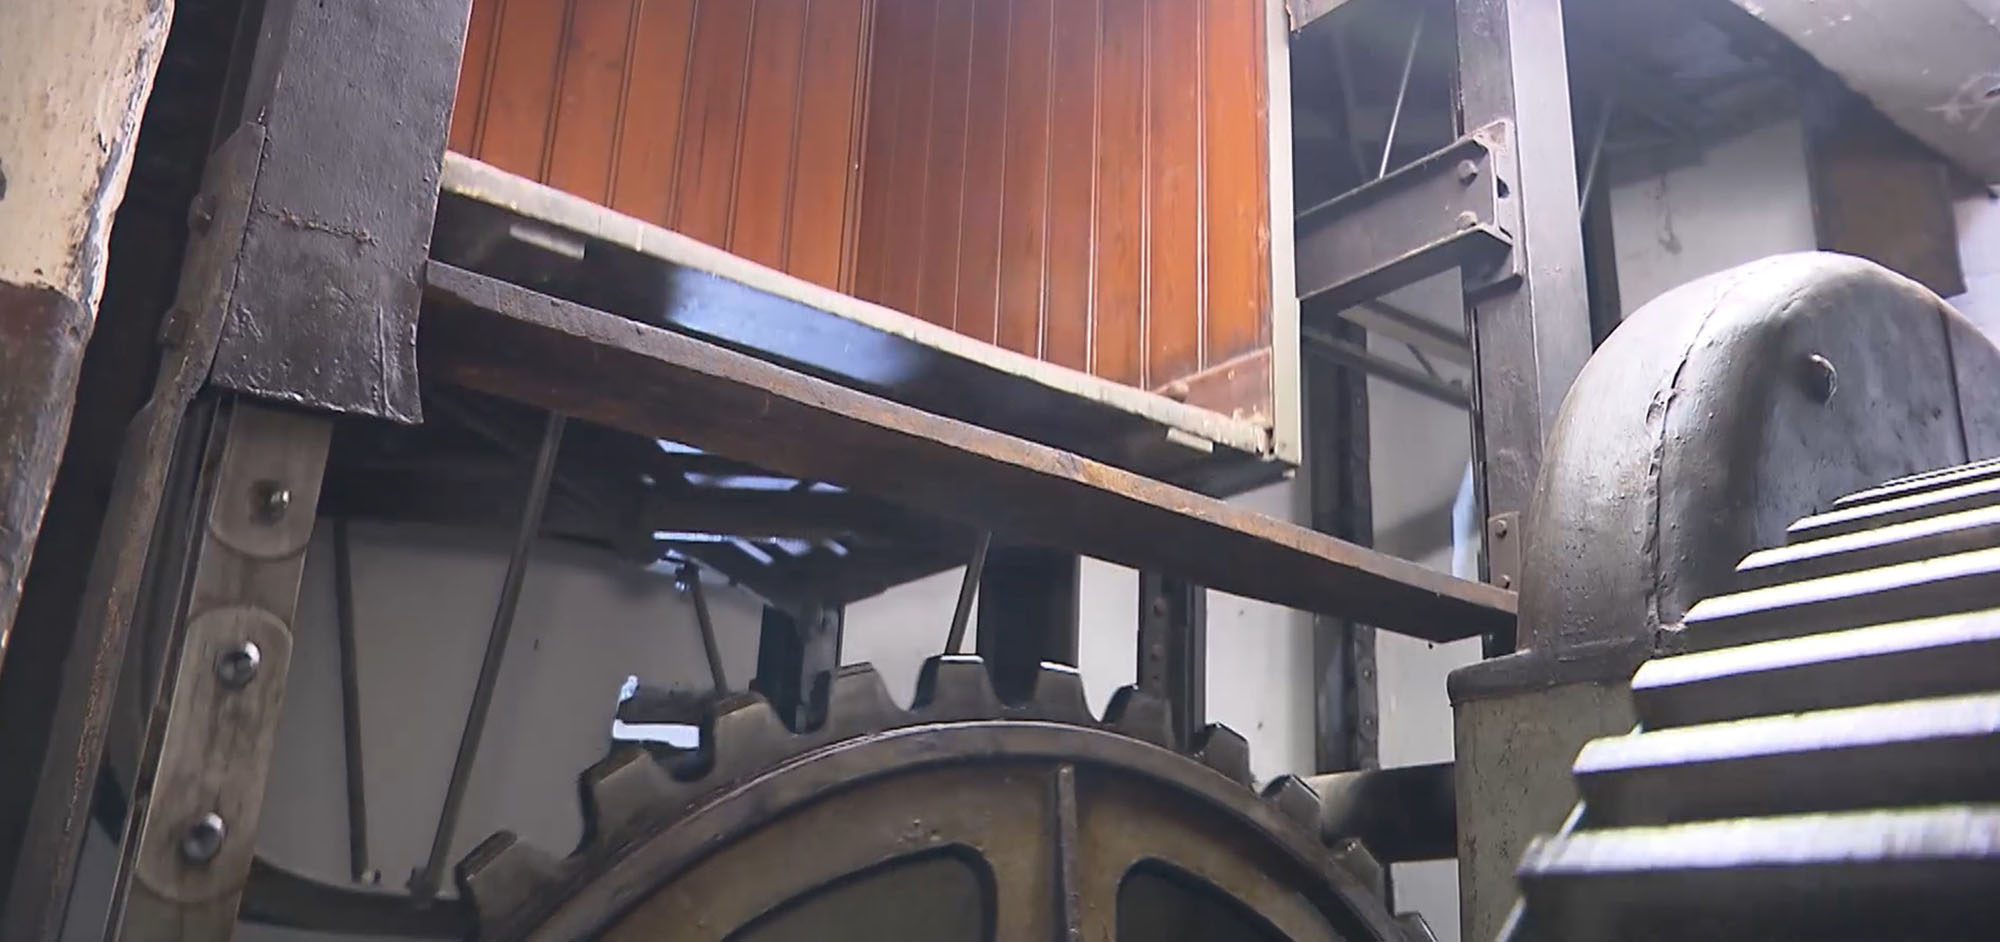 Read more about the article World’s Oldest Paternoster Elevator Back In Service